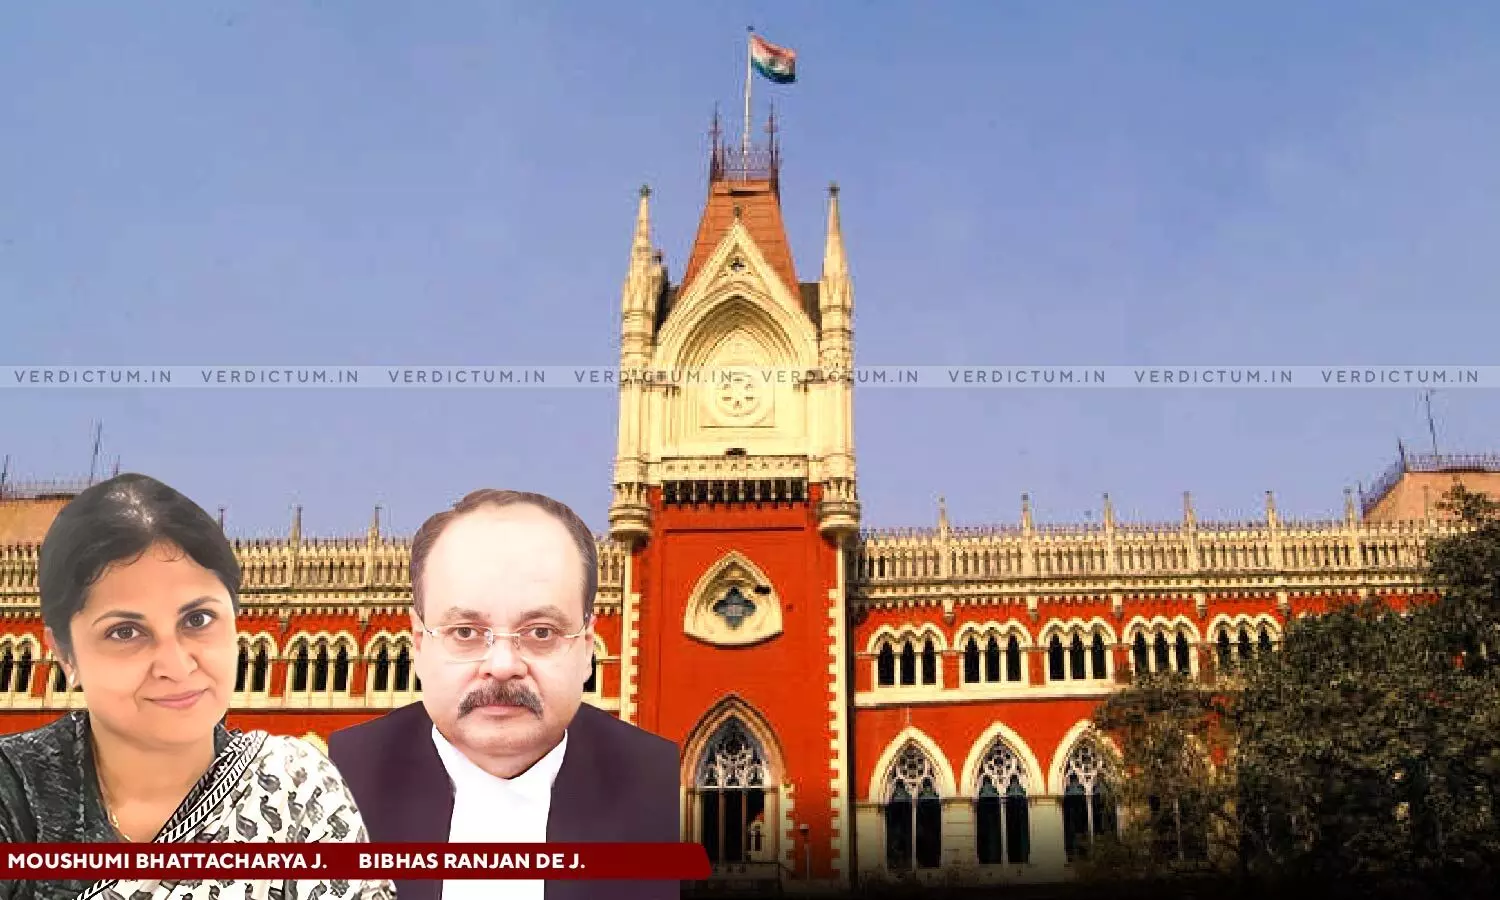 Rail Vikas Nigam Has A Duty To Preserve Ecological Balance: Calcutta High Court Grants Interim Order Halting Uprooting Of Trees